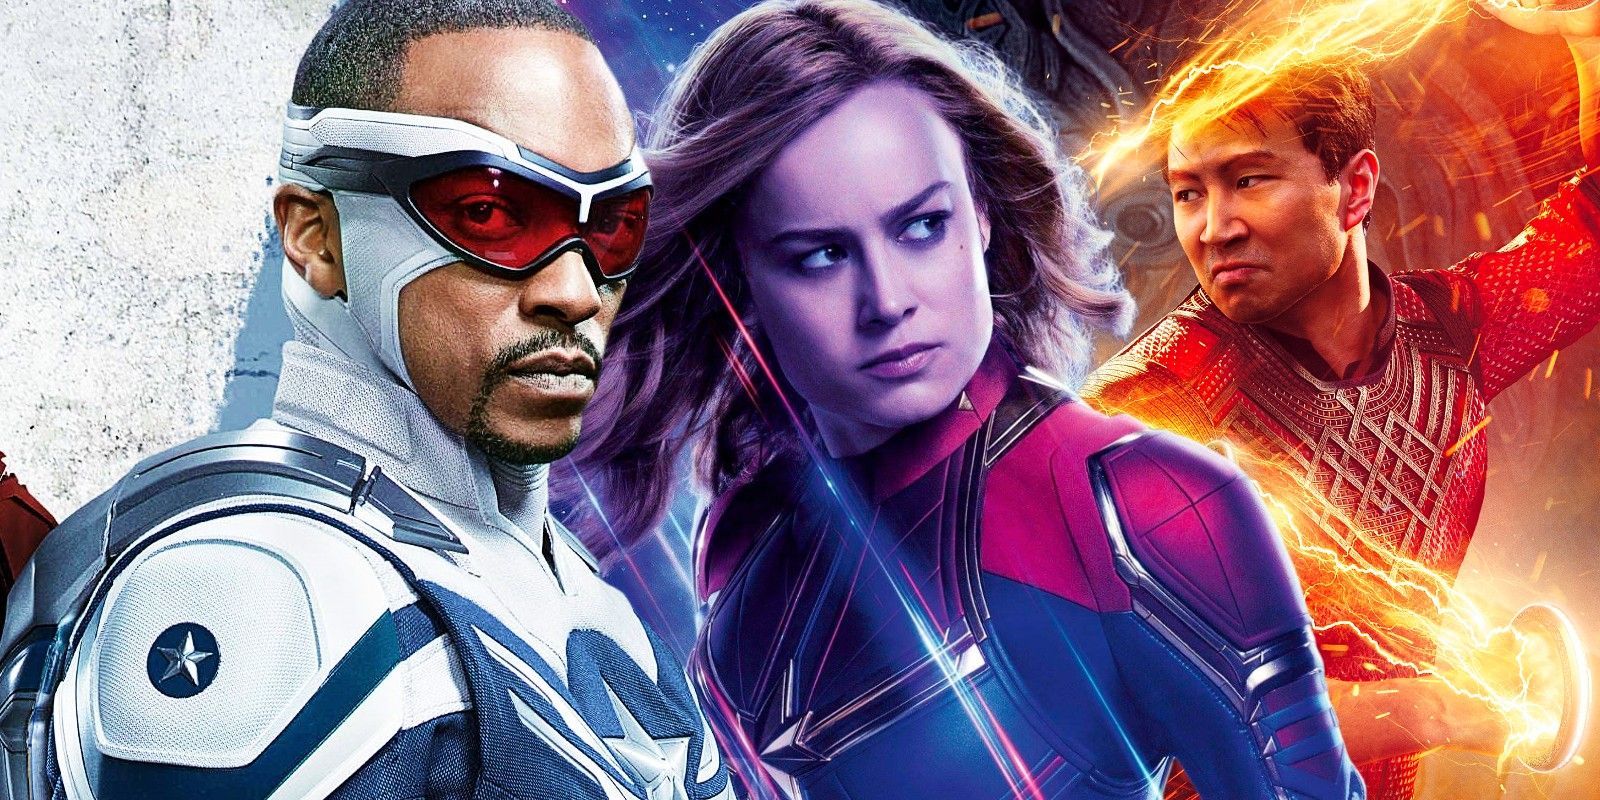 Anthony Mackie as Captain America, Brie Larson as Captain Marvel, and Simu Liu as Shang-Chi